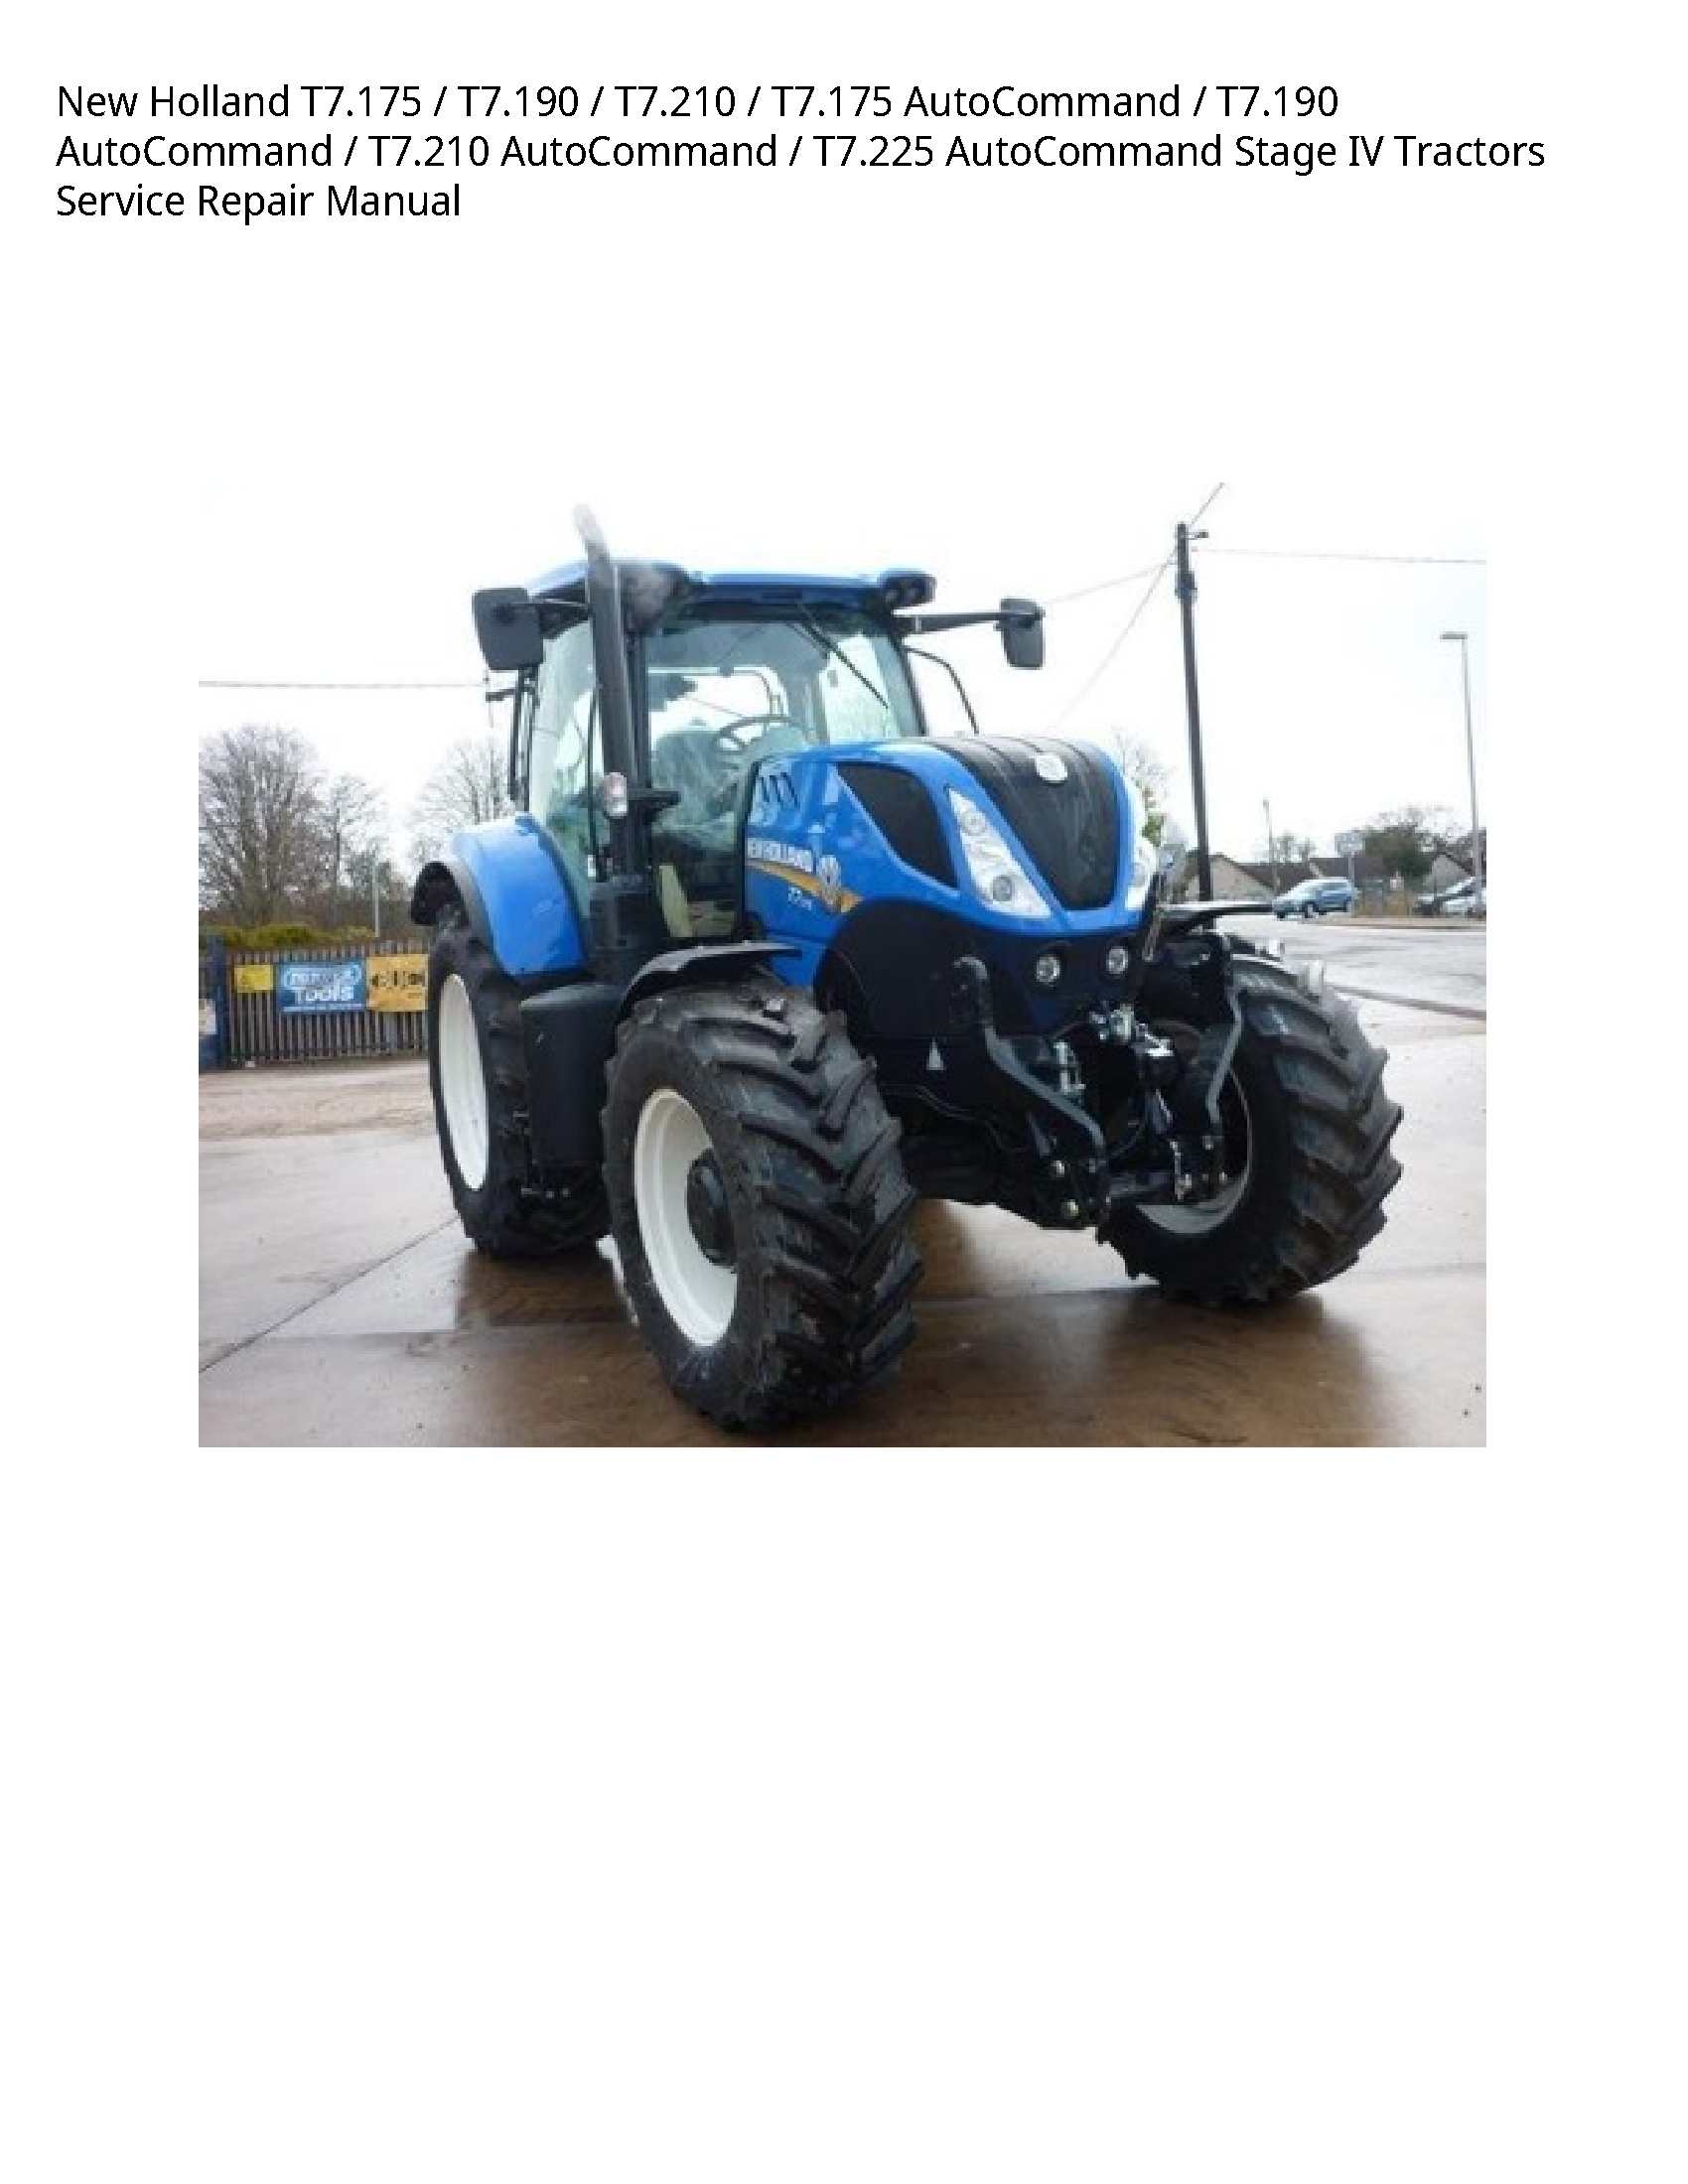 New Holland T7.175 AutoCommand AutoCommand AutoCommand AutoCommand Stage IV Tractors manual